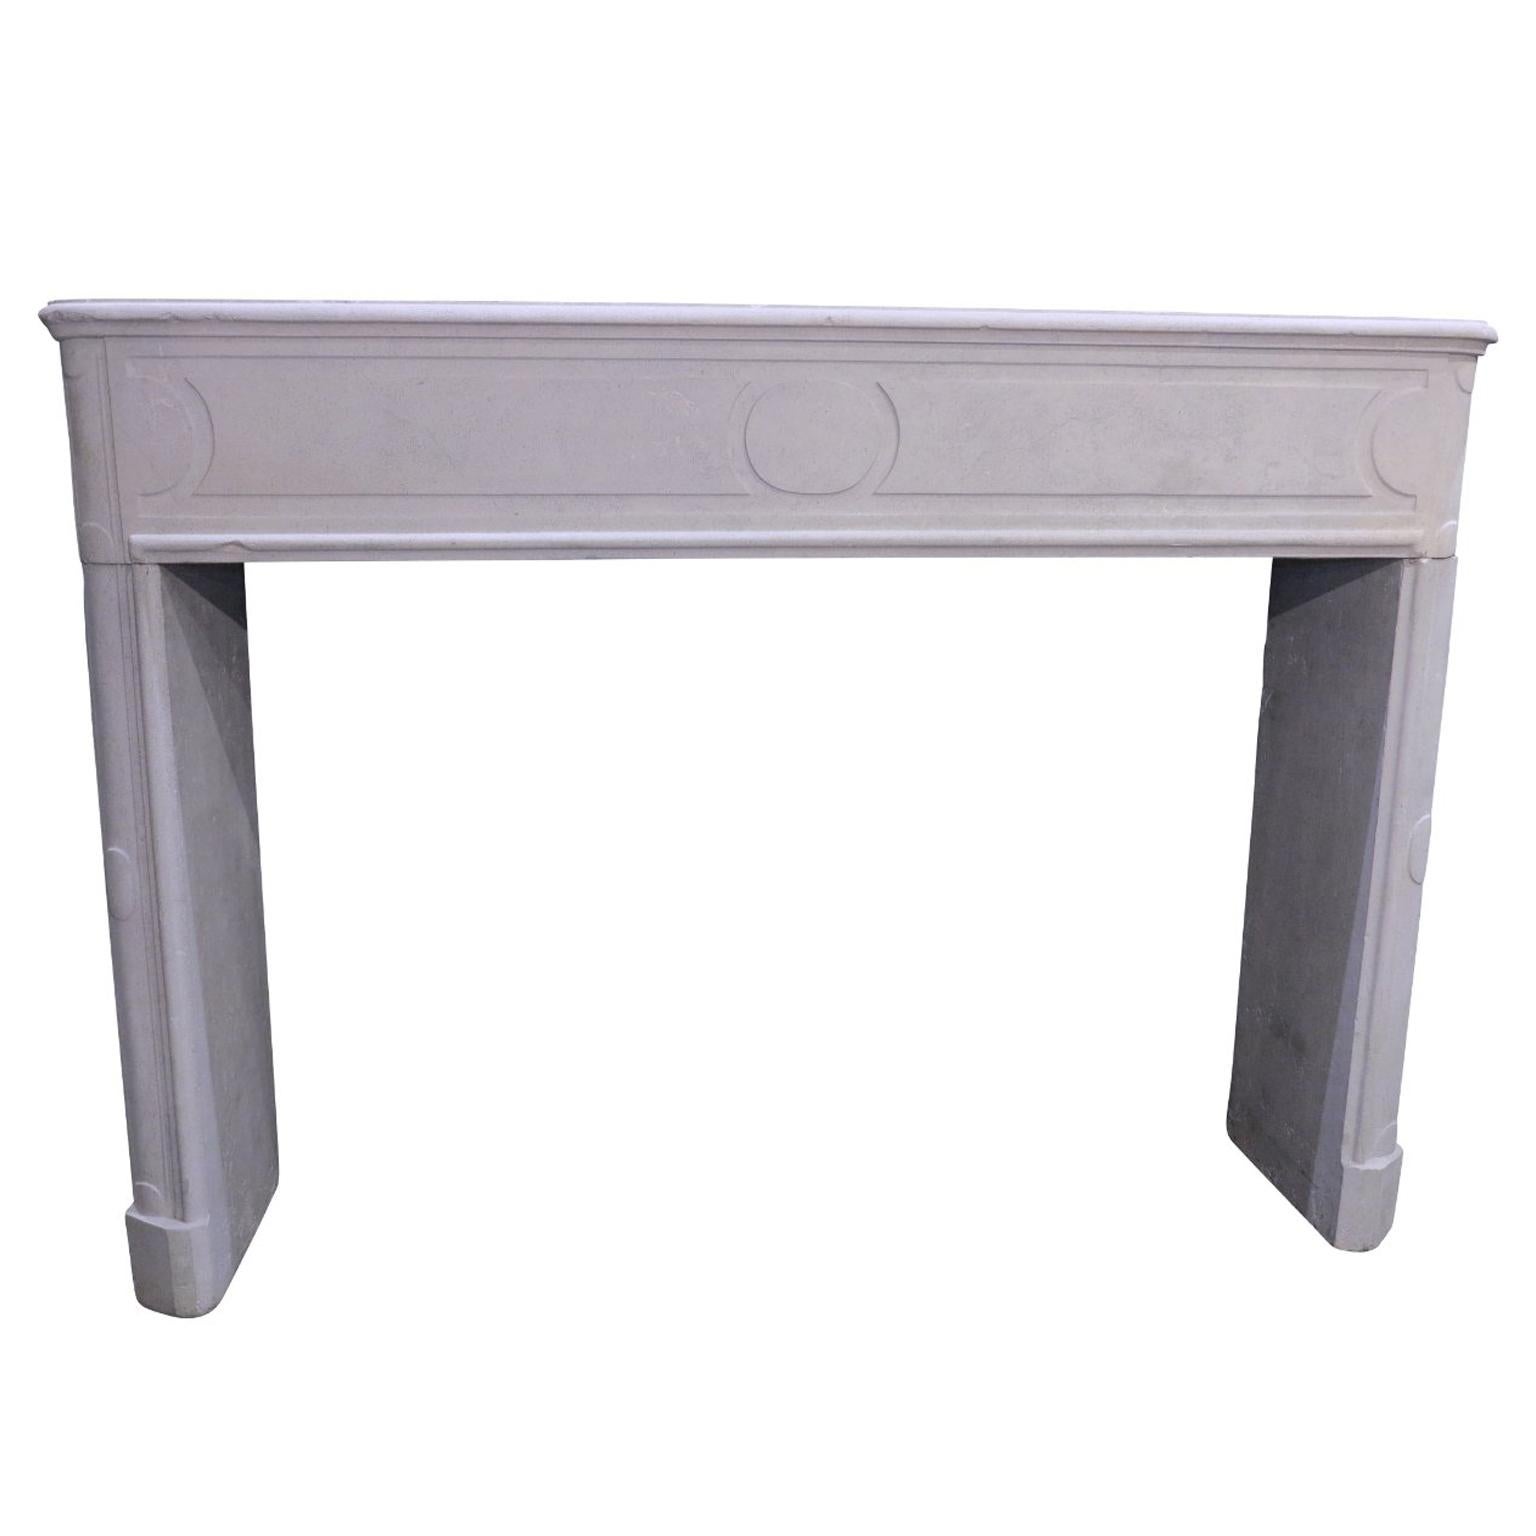 Decorative Fireplace Mantel in the Style of Louis XVI For Sale